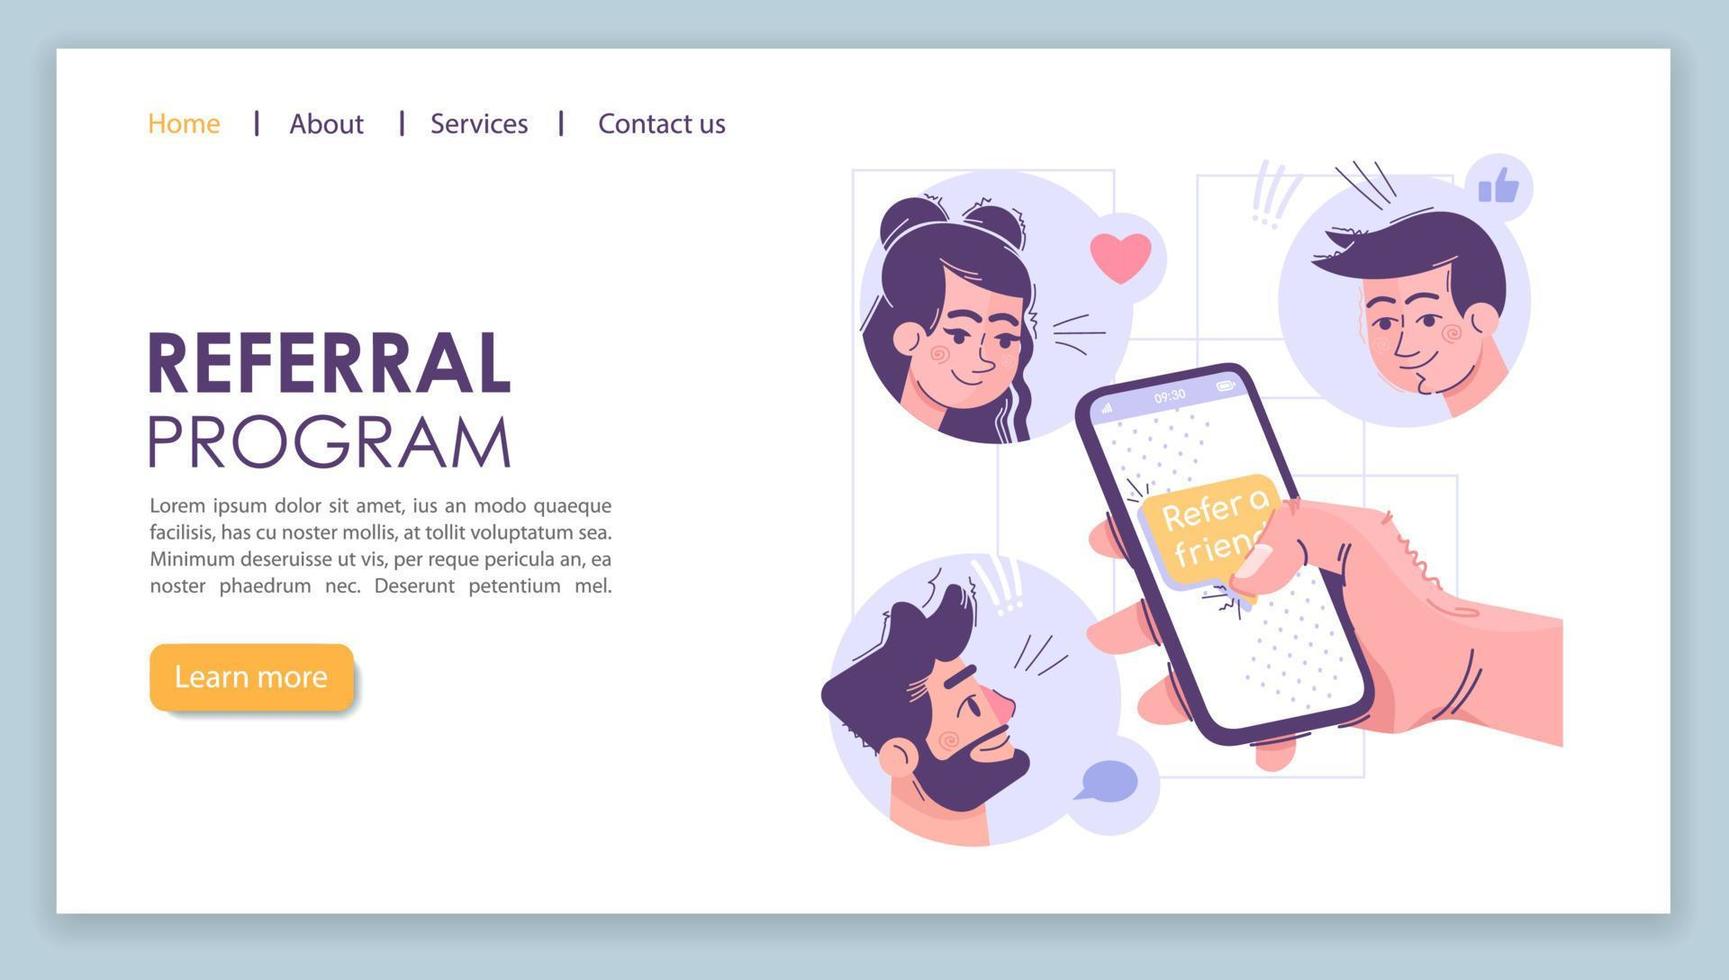 Referral program landing page vector template. Social media marketing website interface idea with flat illustrations. Company homepage layout. Refer a friend web banner, webpage cartoon concept